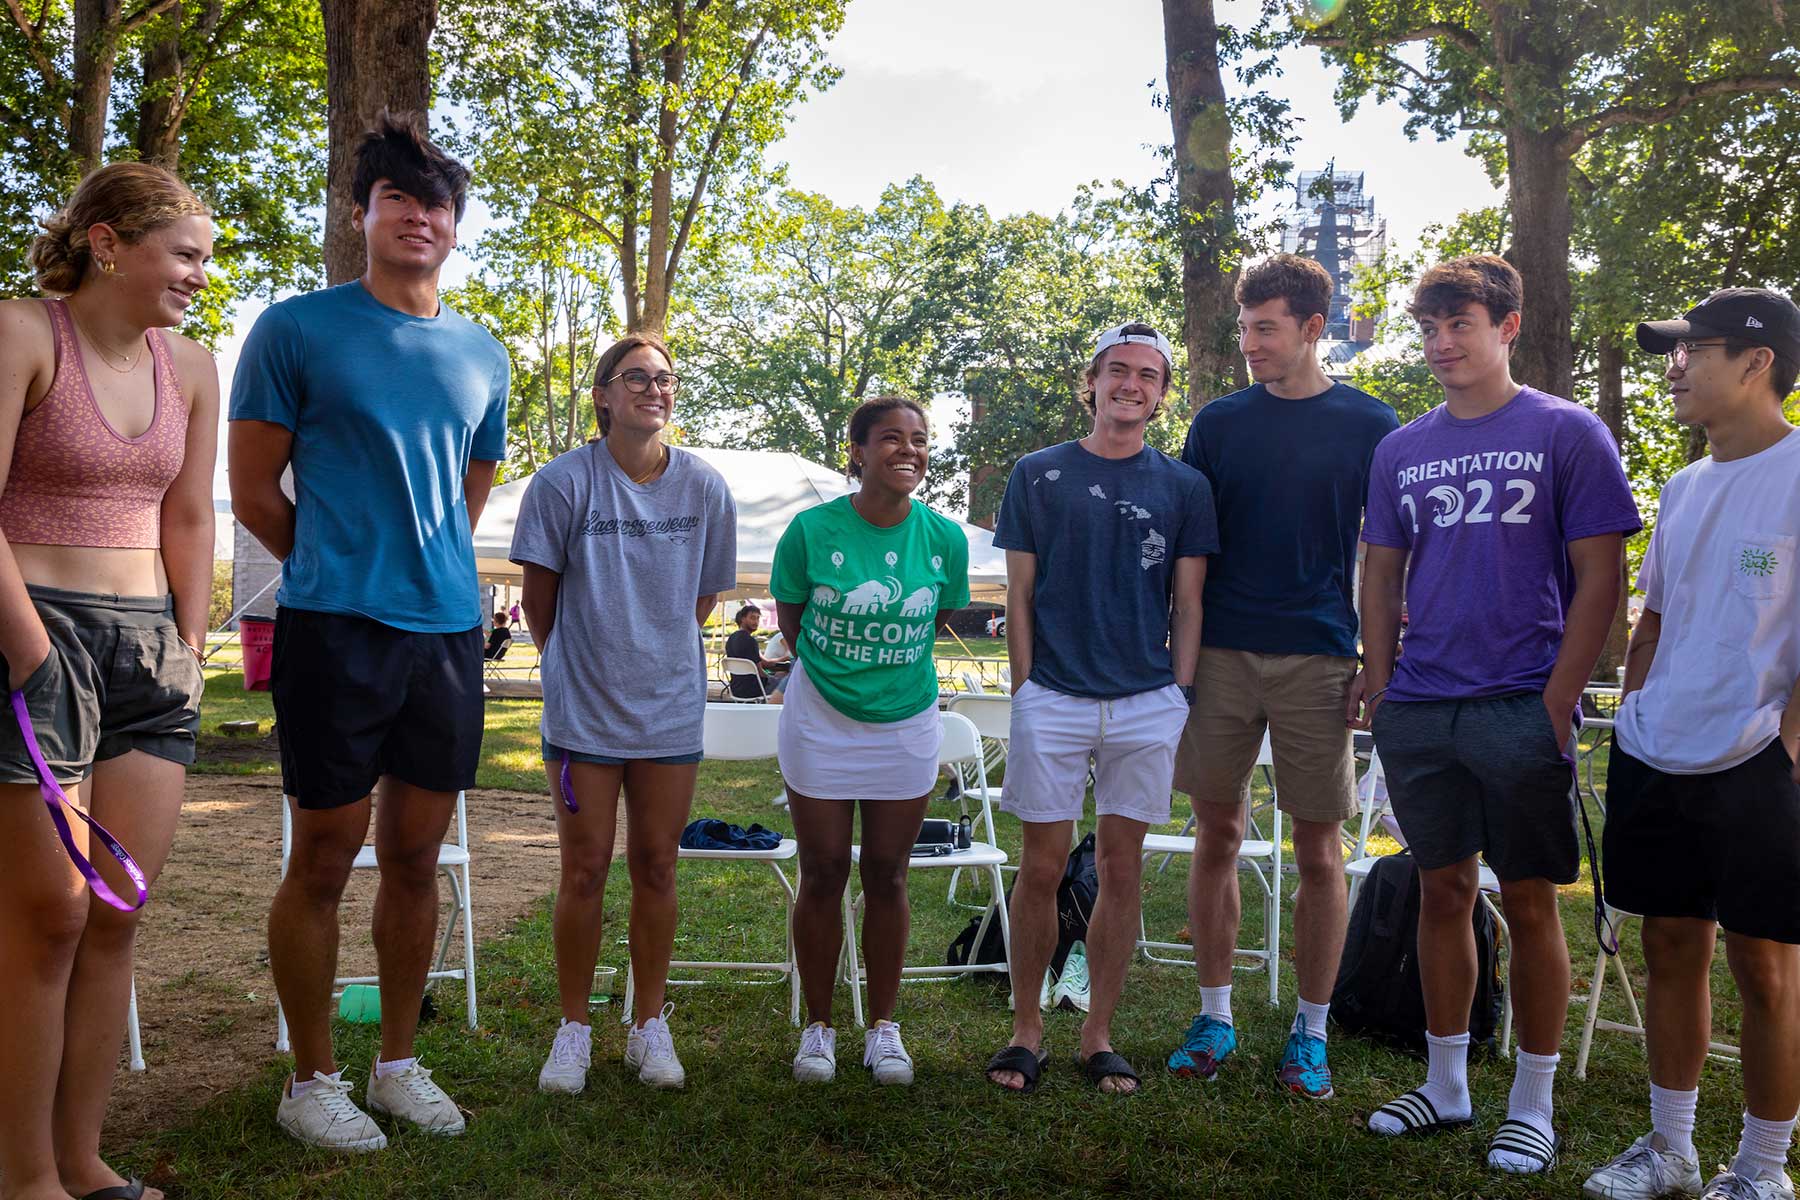 A group of students pose together in a semi-circle on the academic quad.